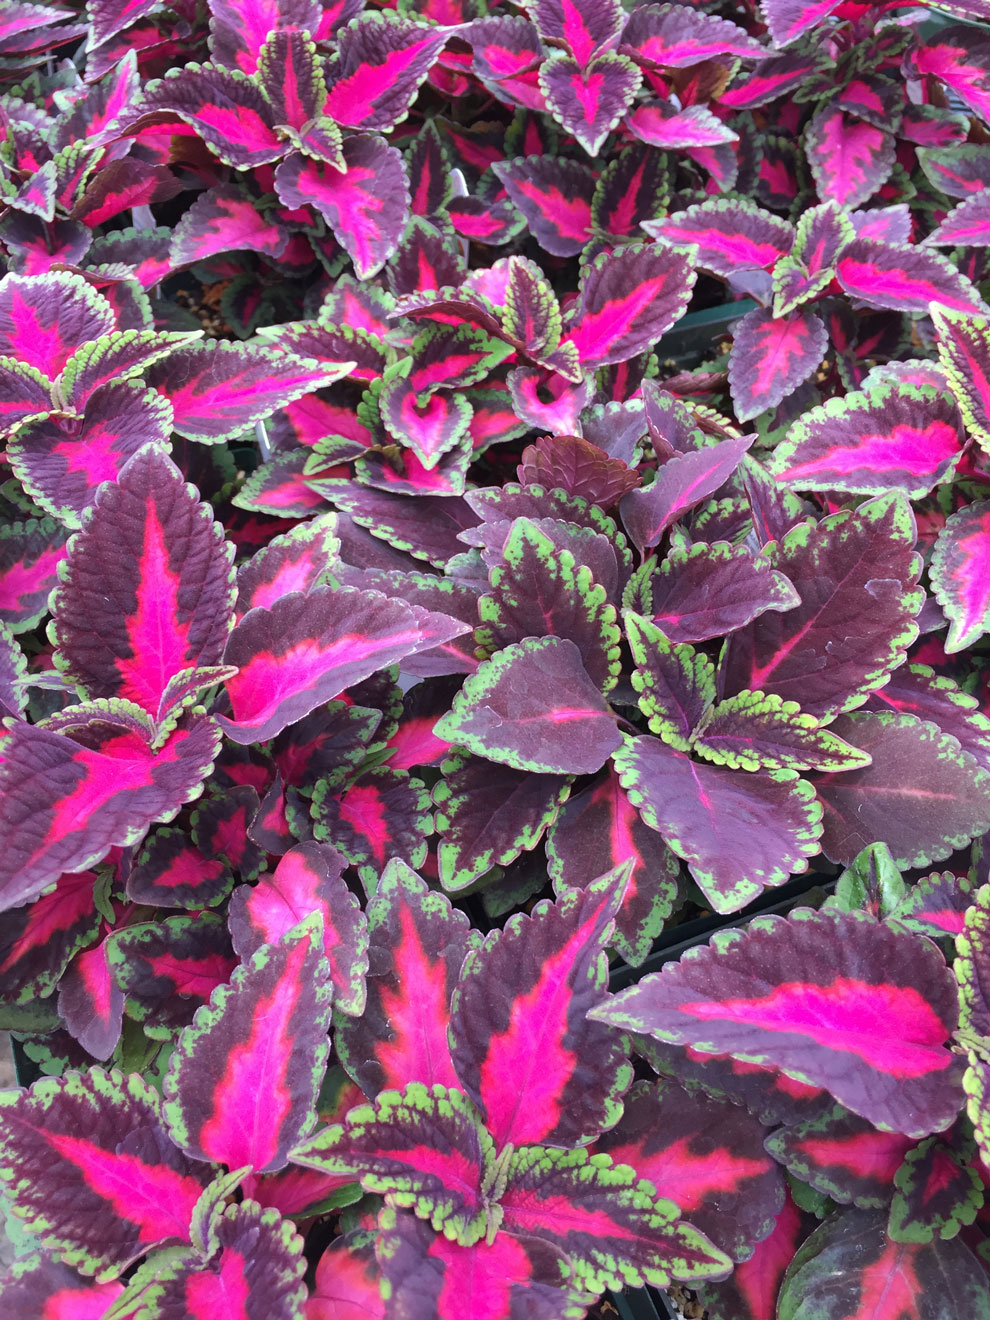 Leaves of coleus plant, variety Main Street Ruby Red